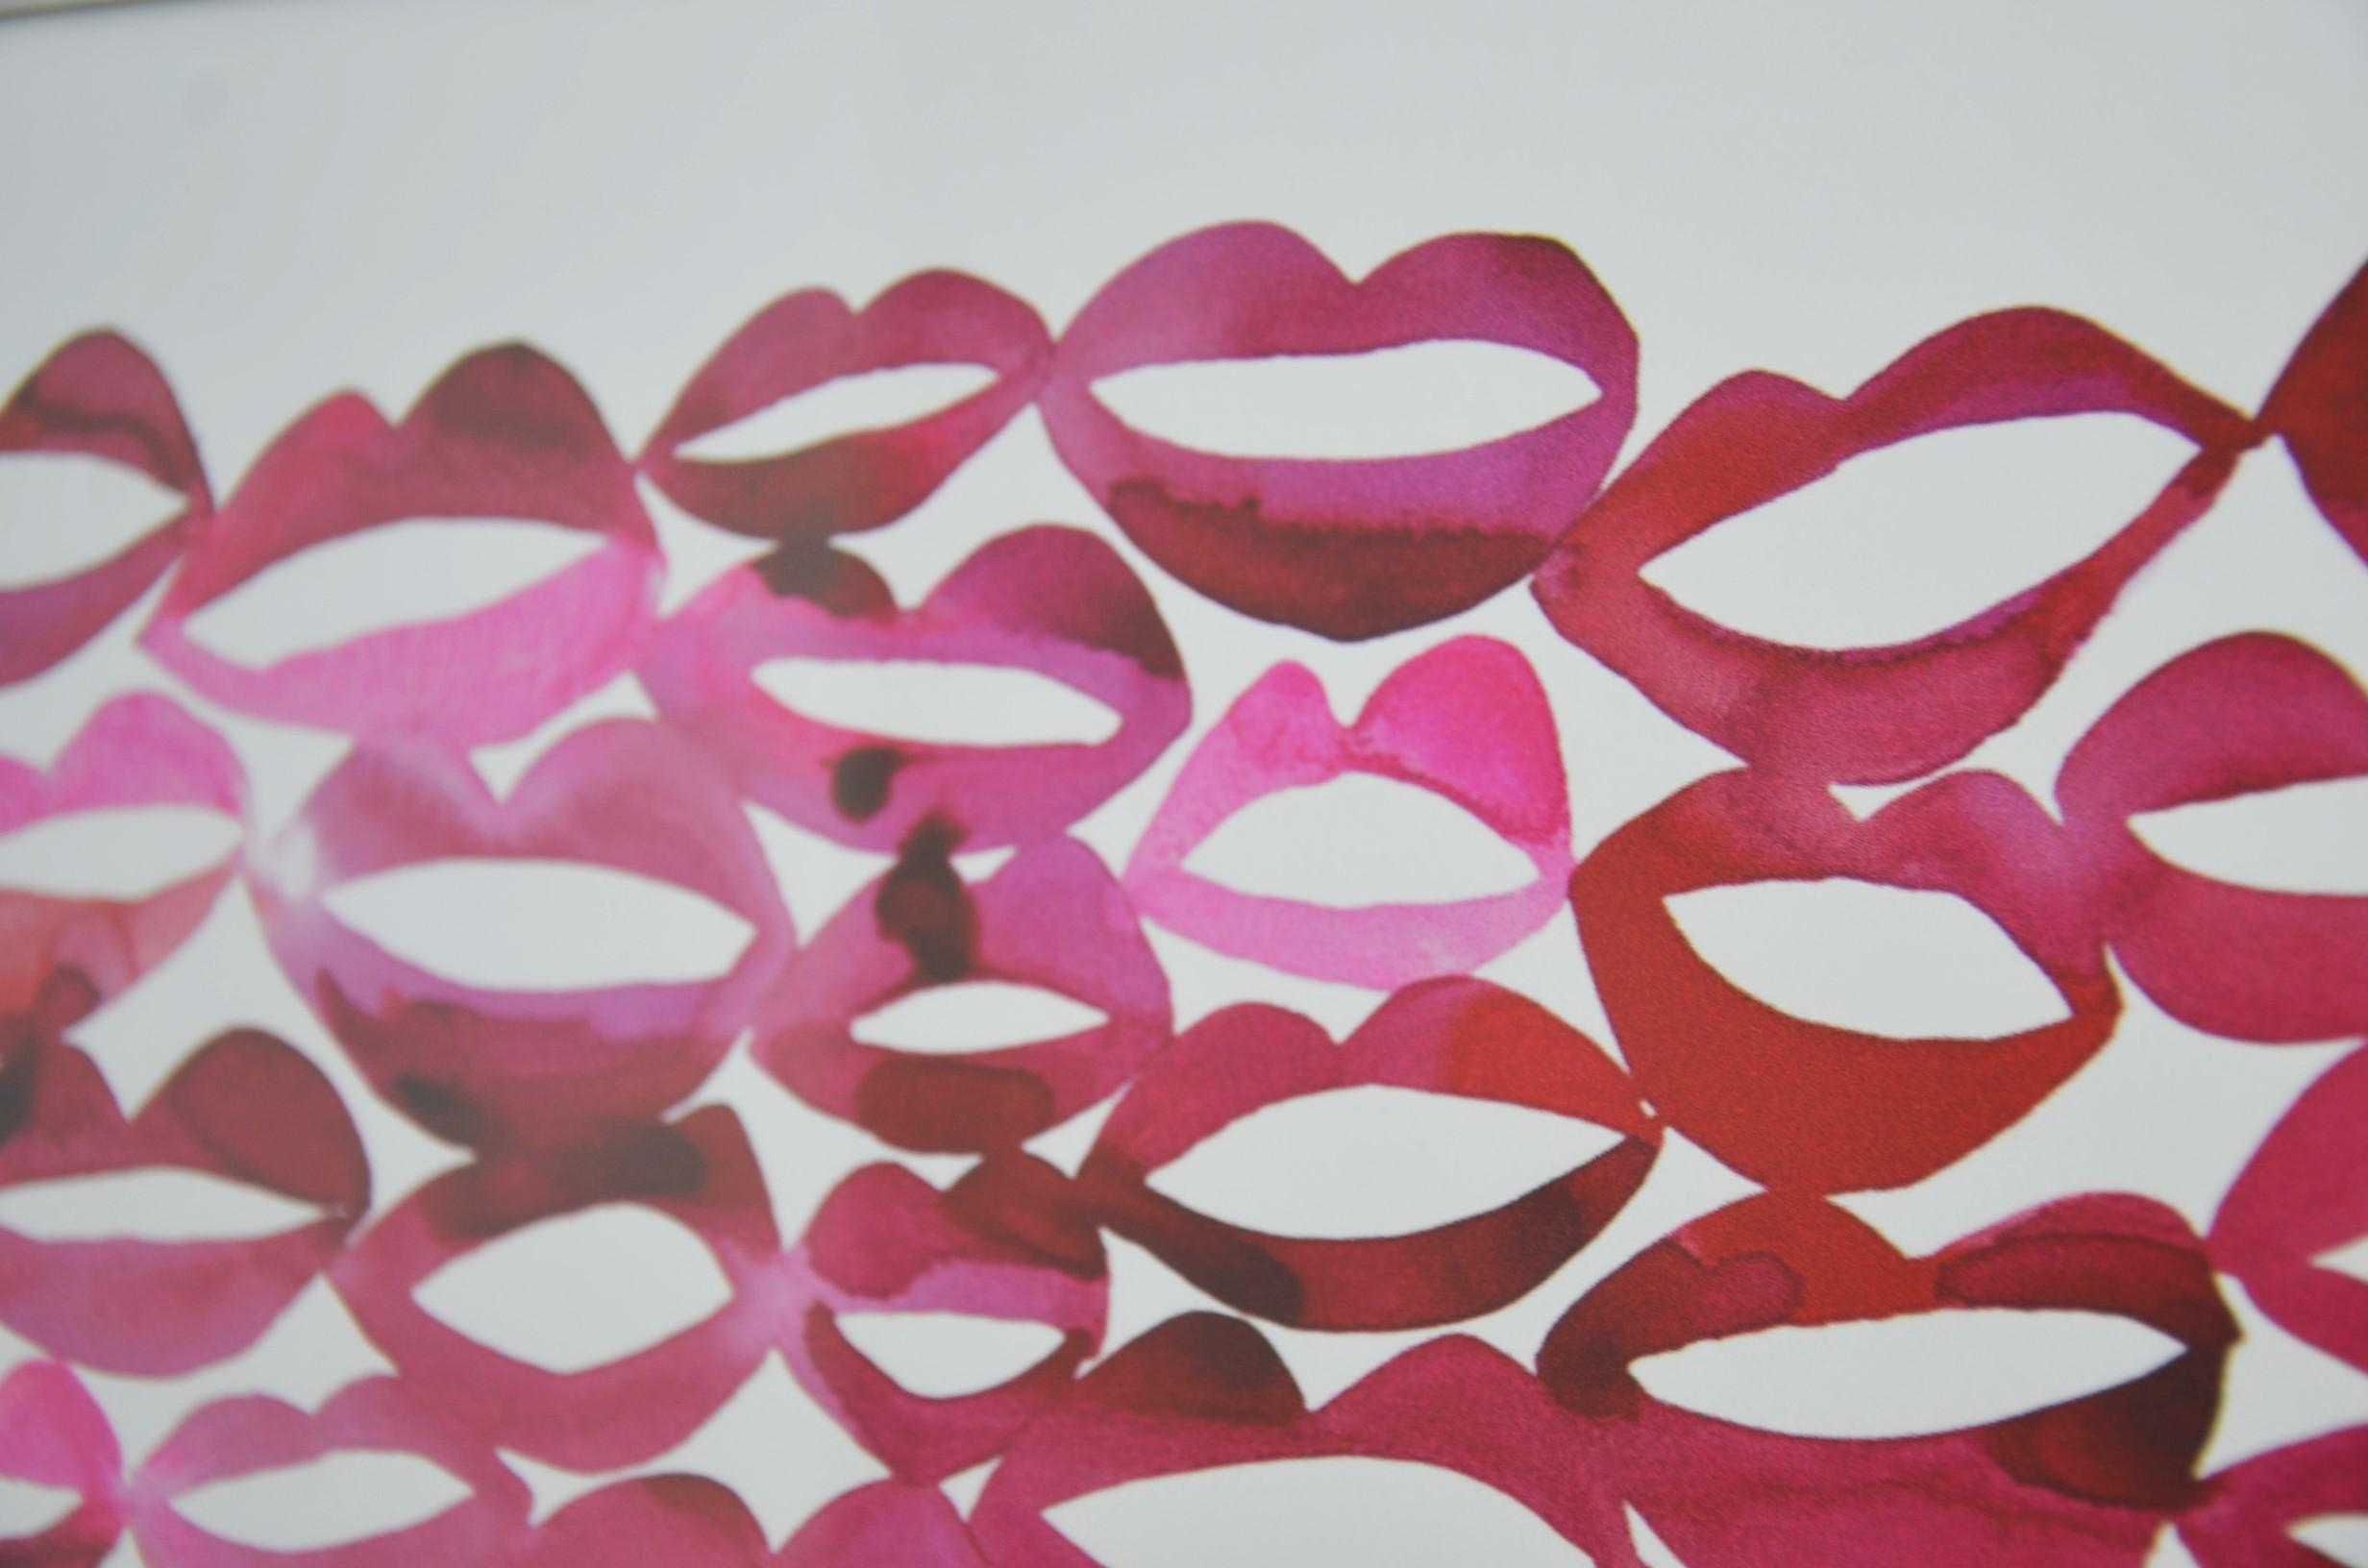 Red and Pink Contemporary Lithograph 